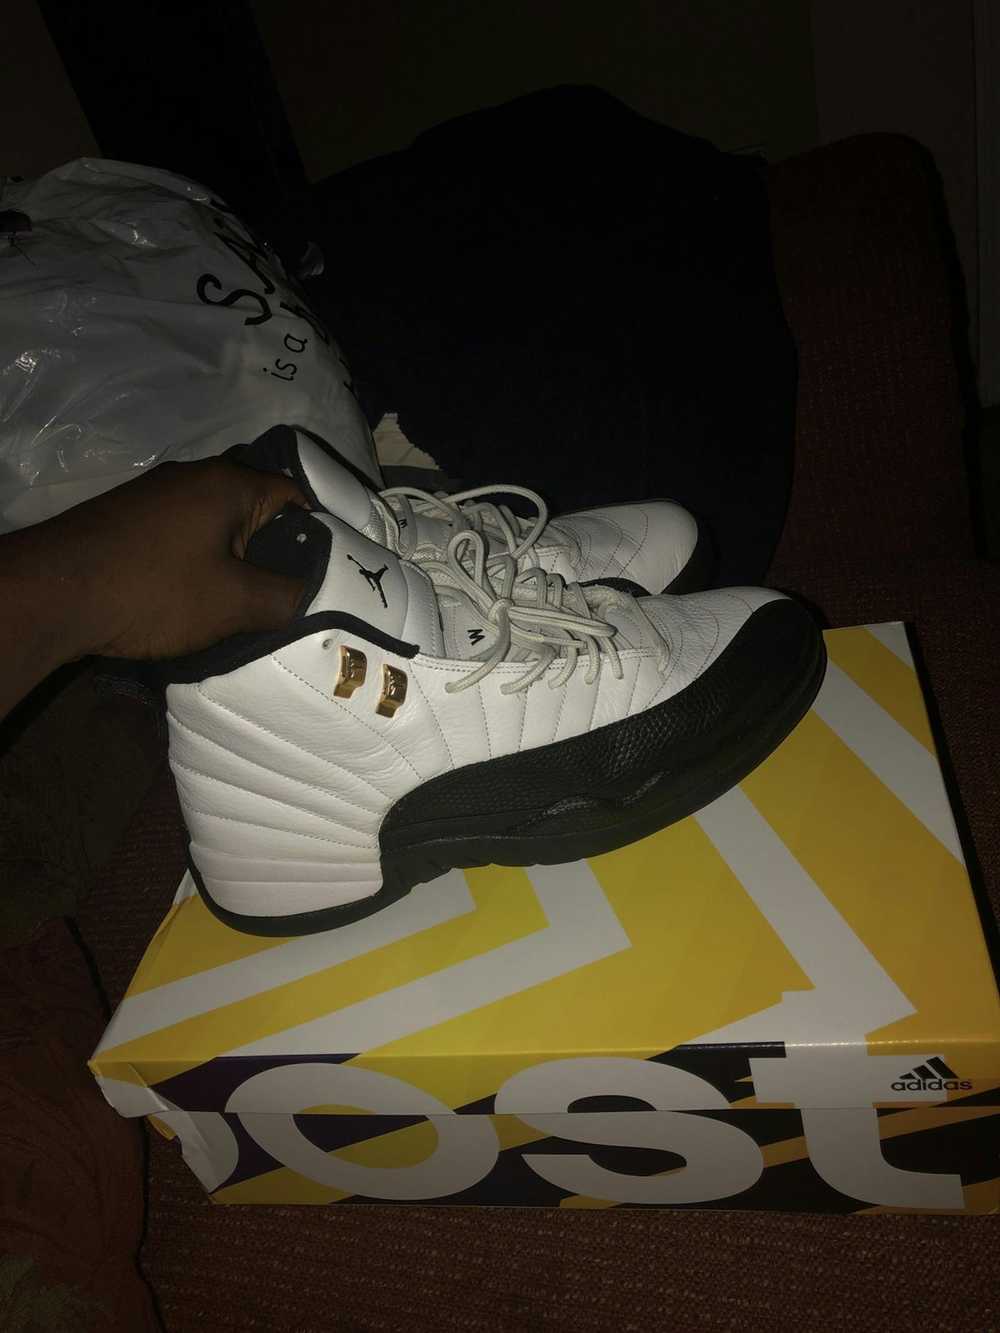 Nike Taxi 12s - image 5